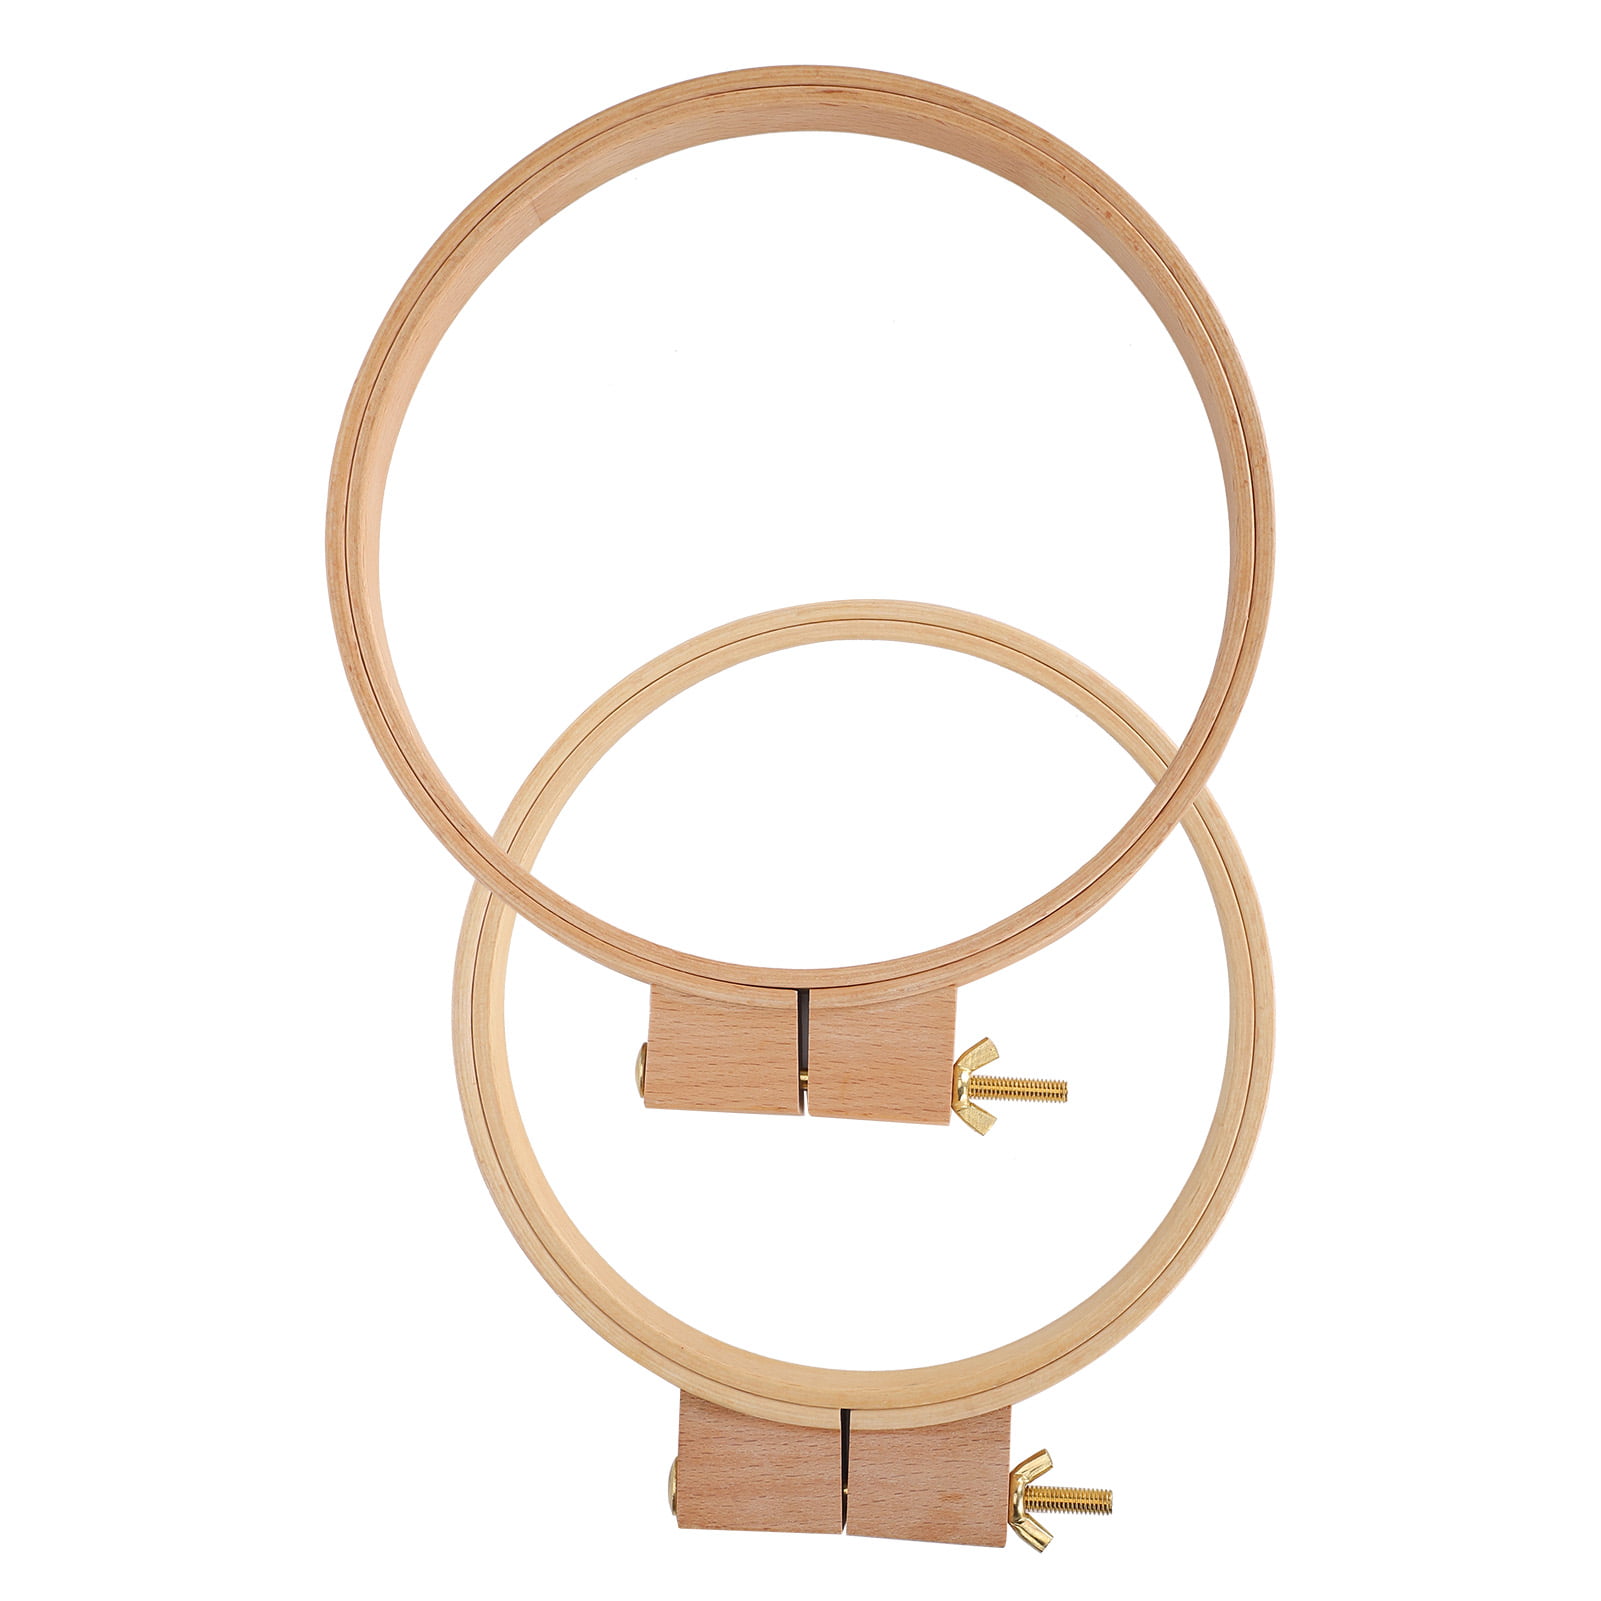 2Pcs Oval Quilting Hoop Stitch Frame Wooden Embroidery Loop Sewing Tools 